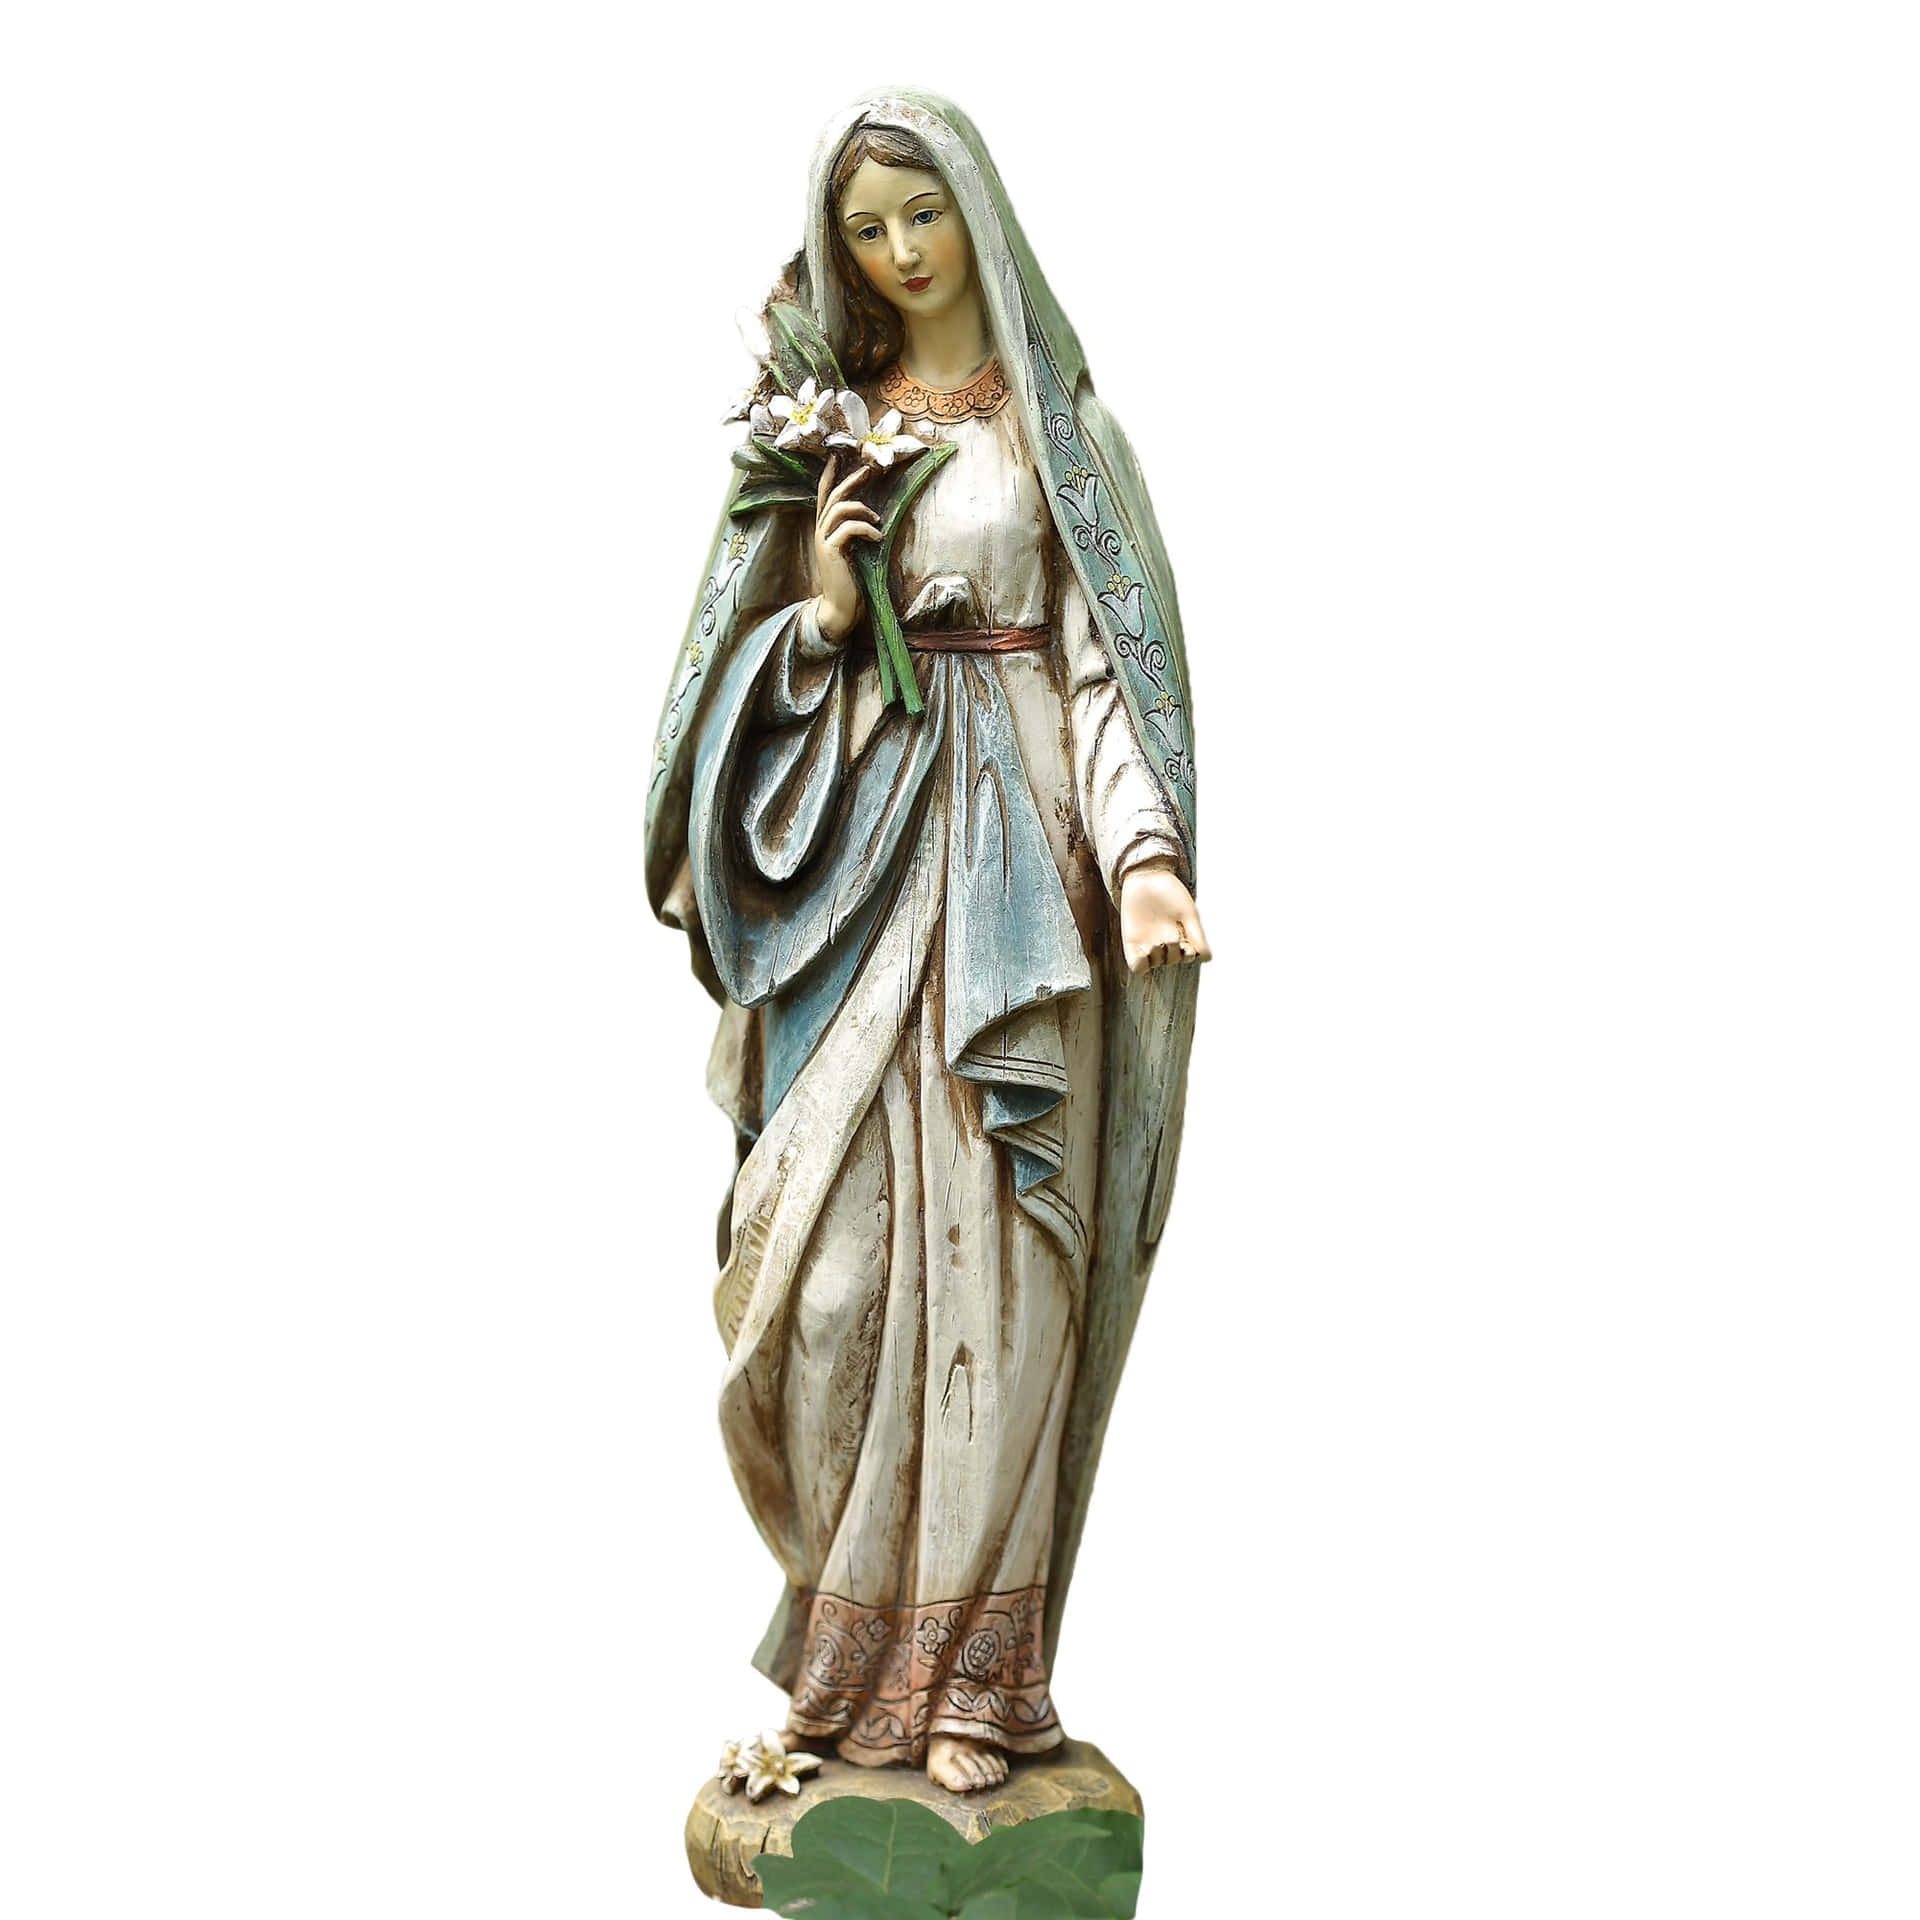 "The Blessed Mother Mary, A Symbol of Love and Comfort"